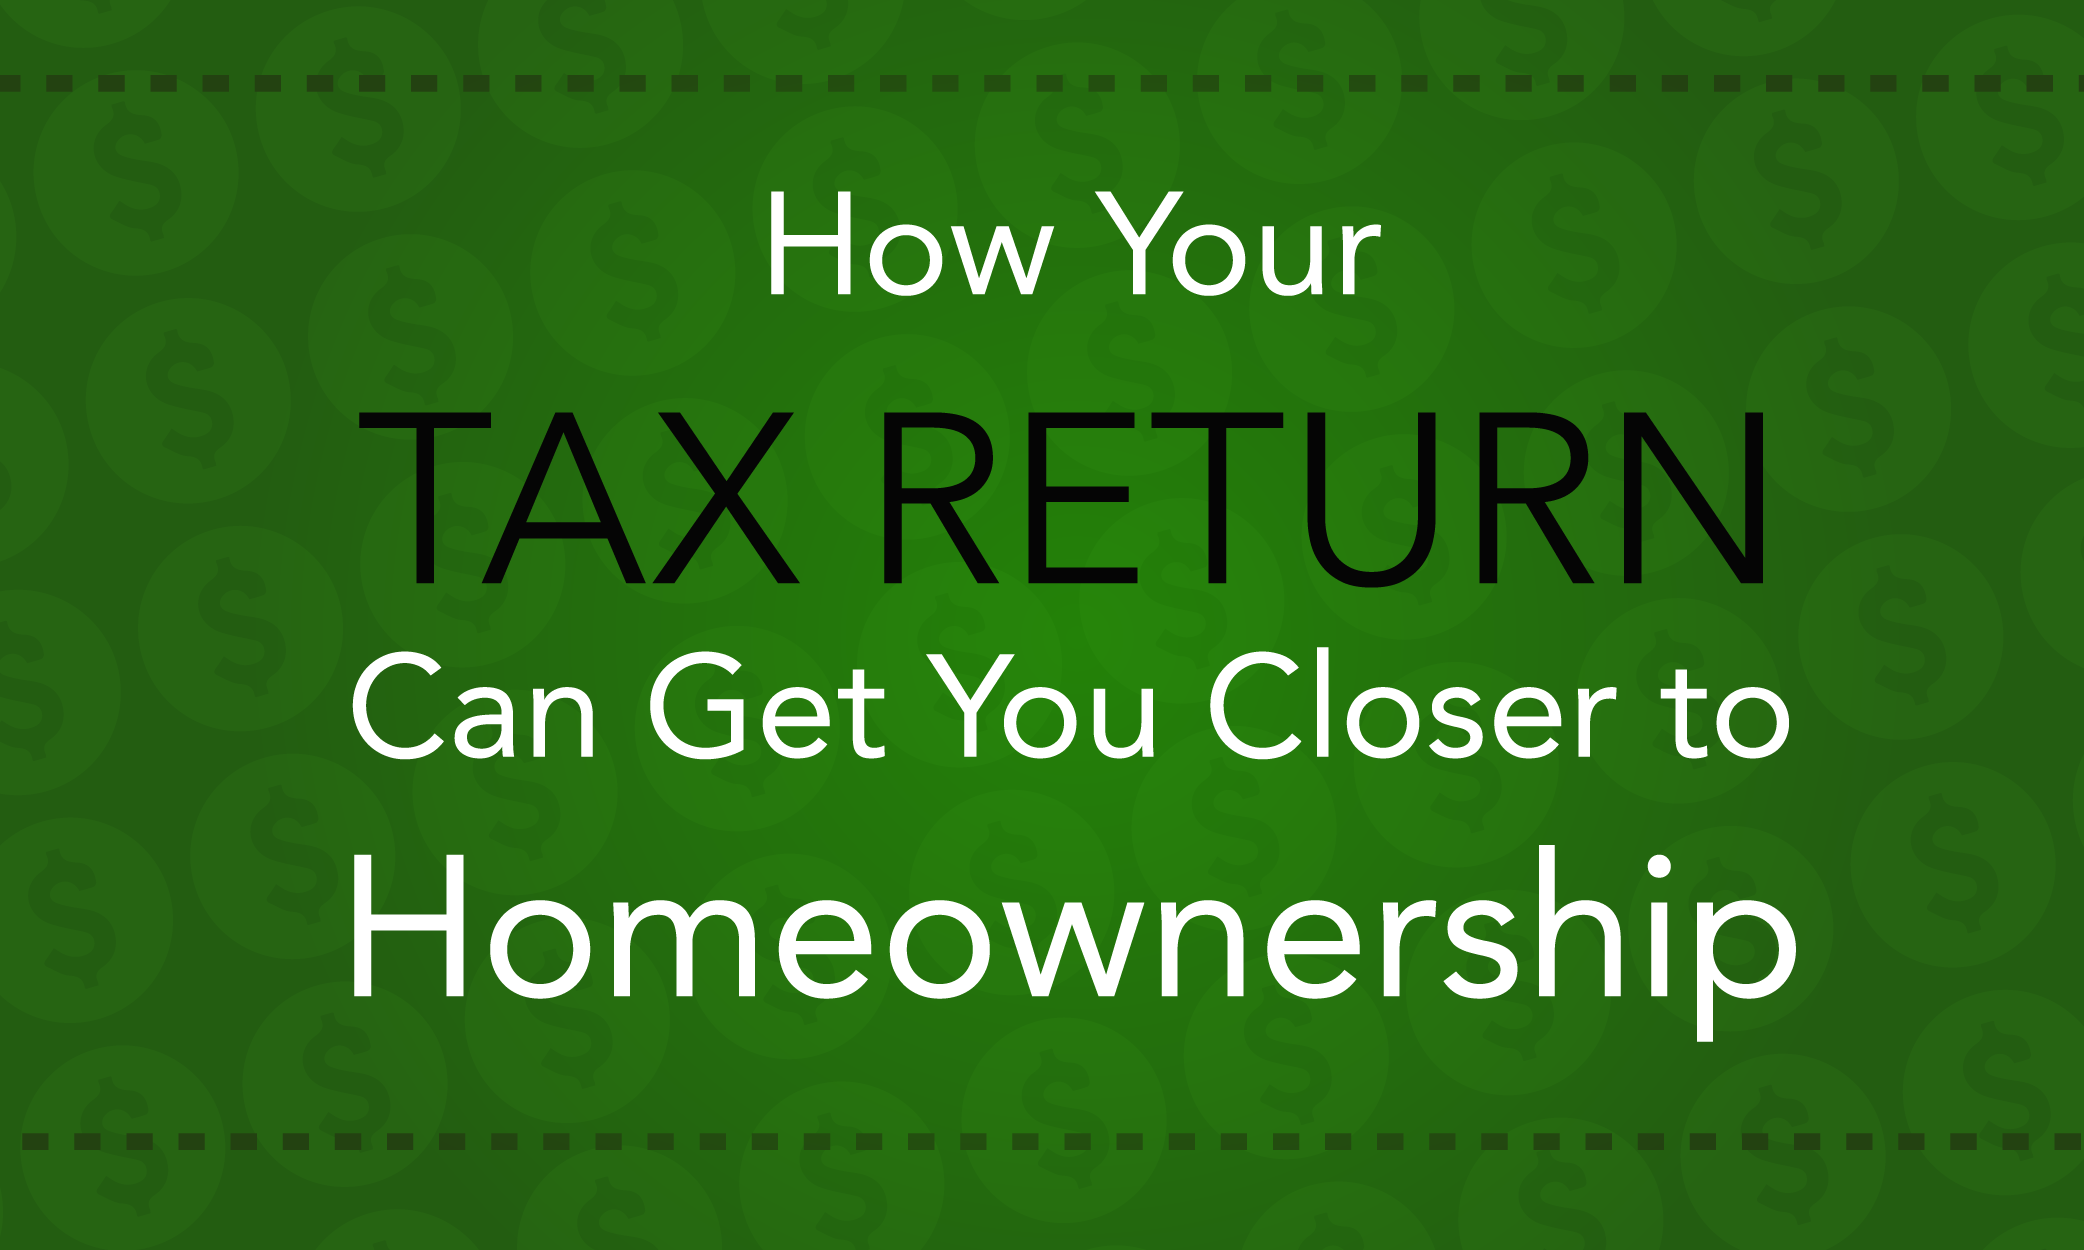 How Your Tax Refund Can Help You Get Closer to Homeownership